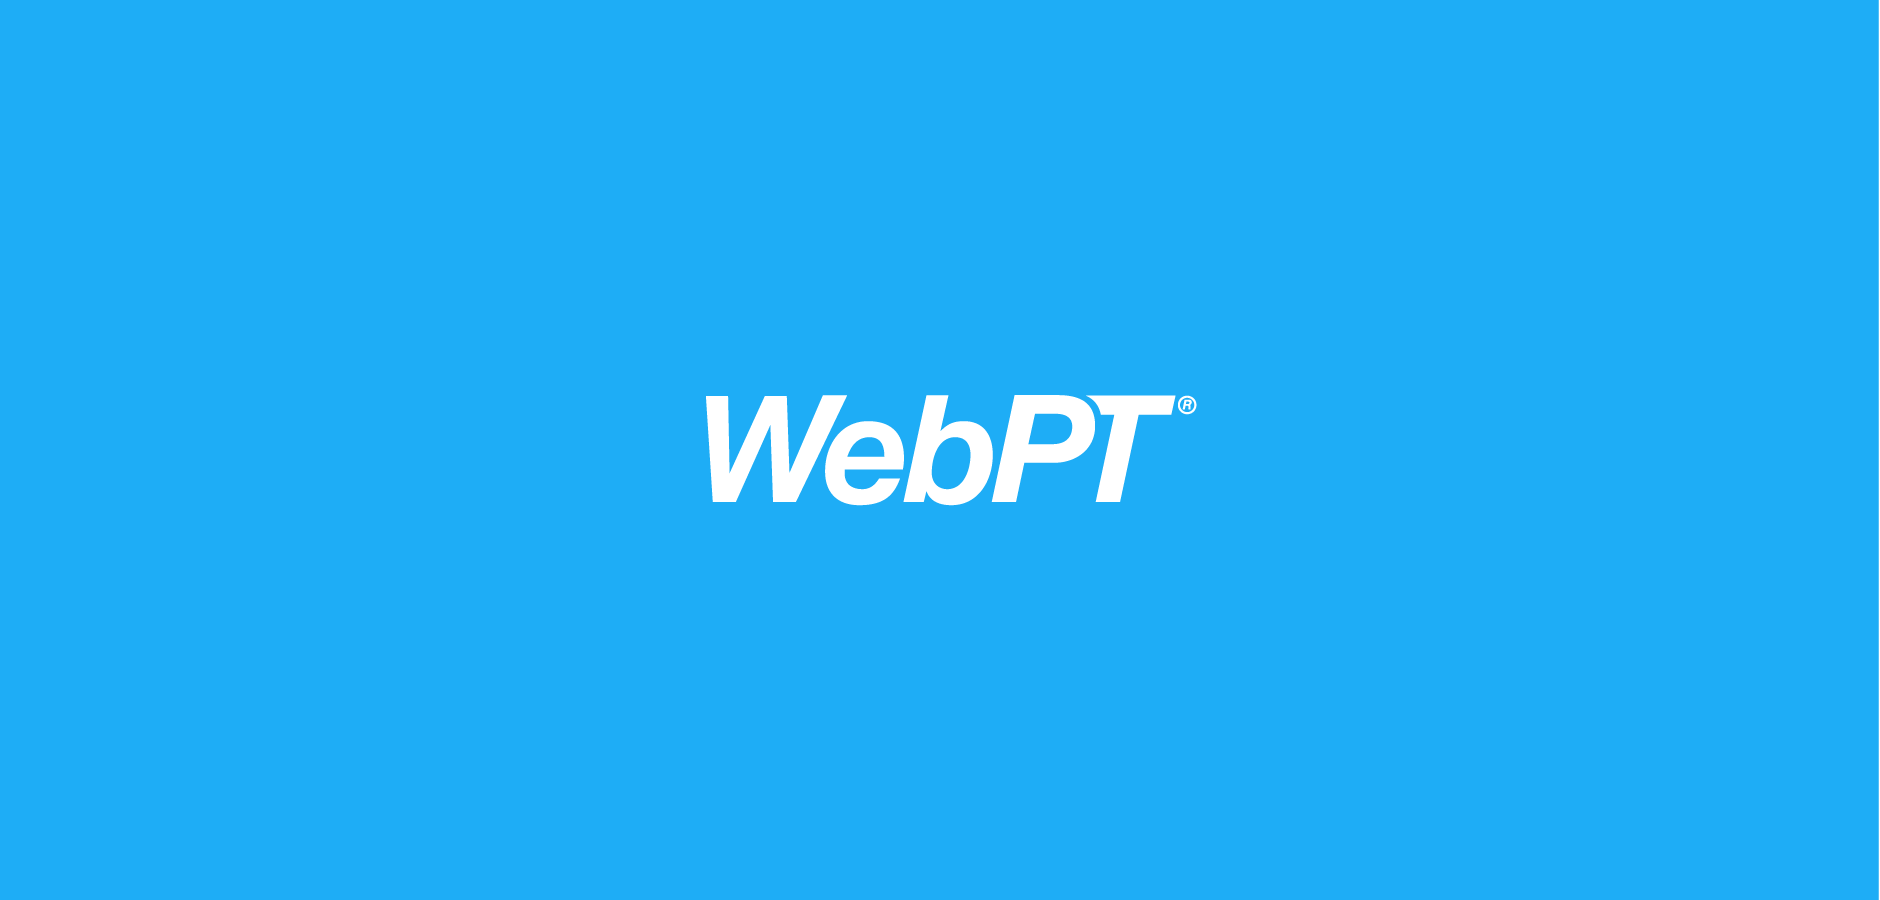 WebPT Launches Industry-Leading Enterprise Capabilities for Information Security and Data Availability